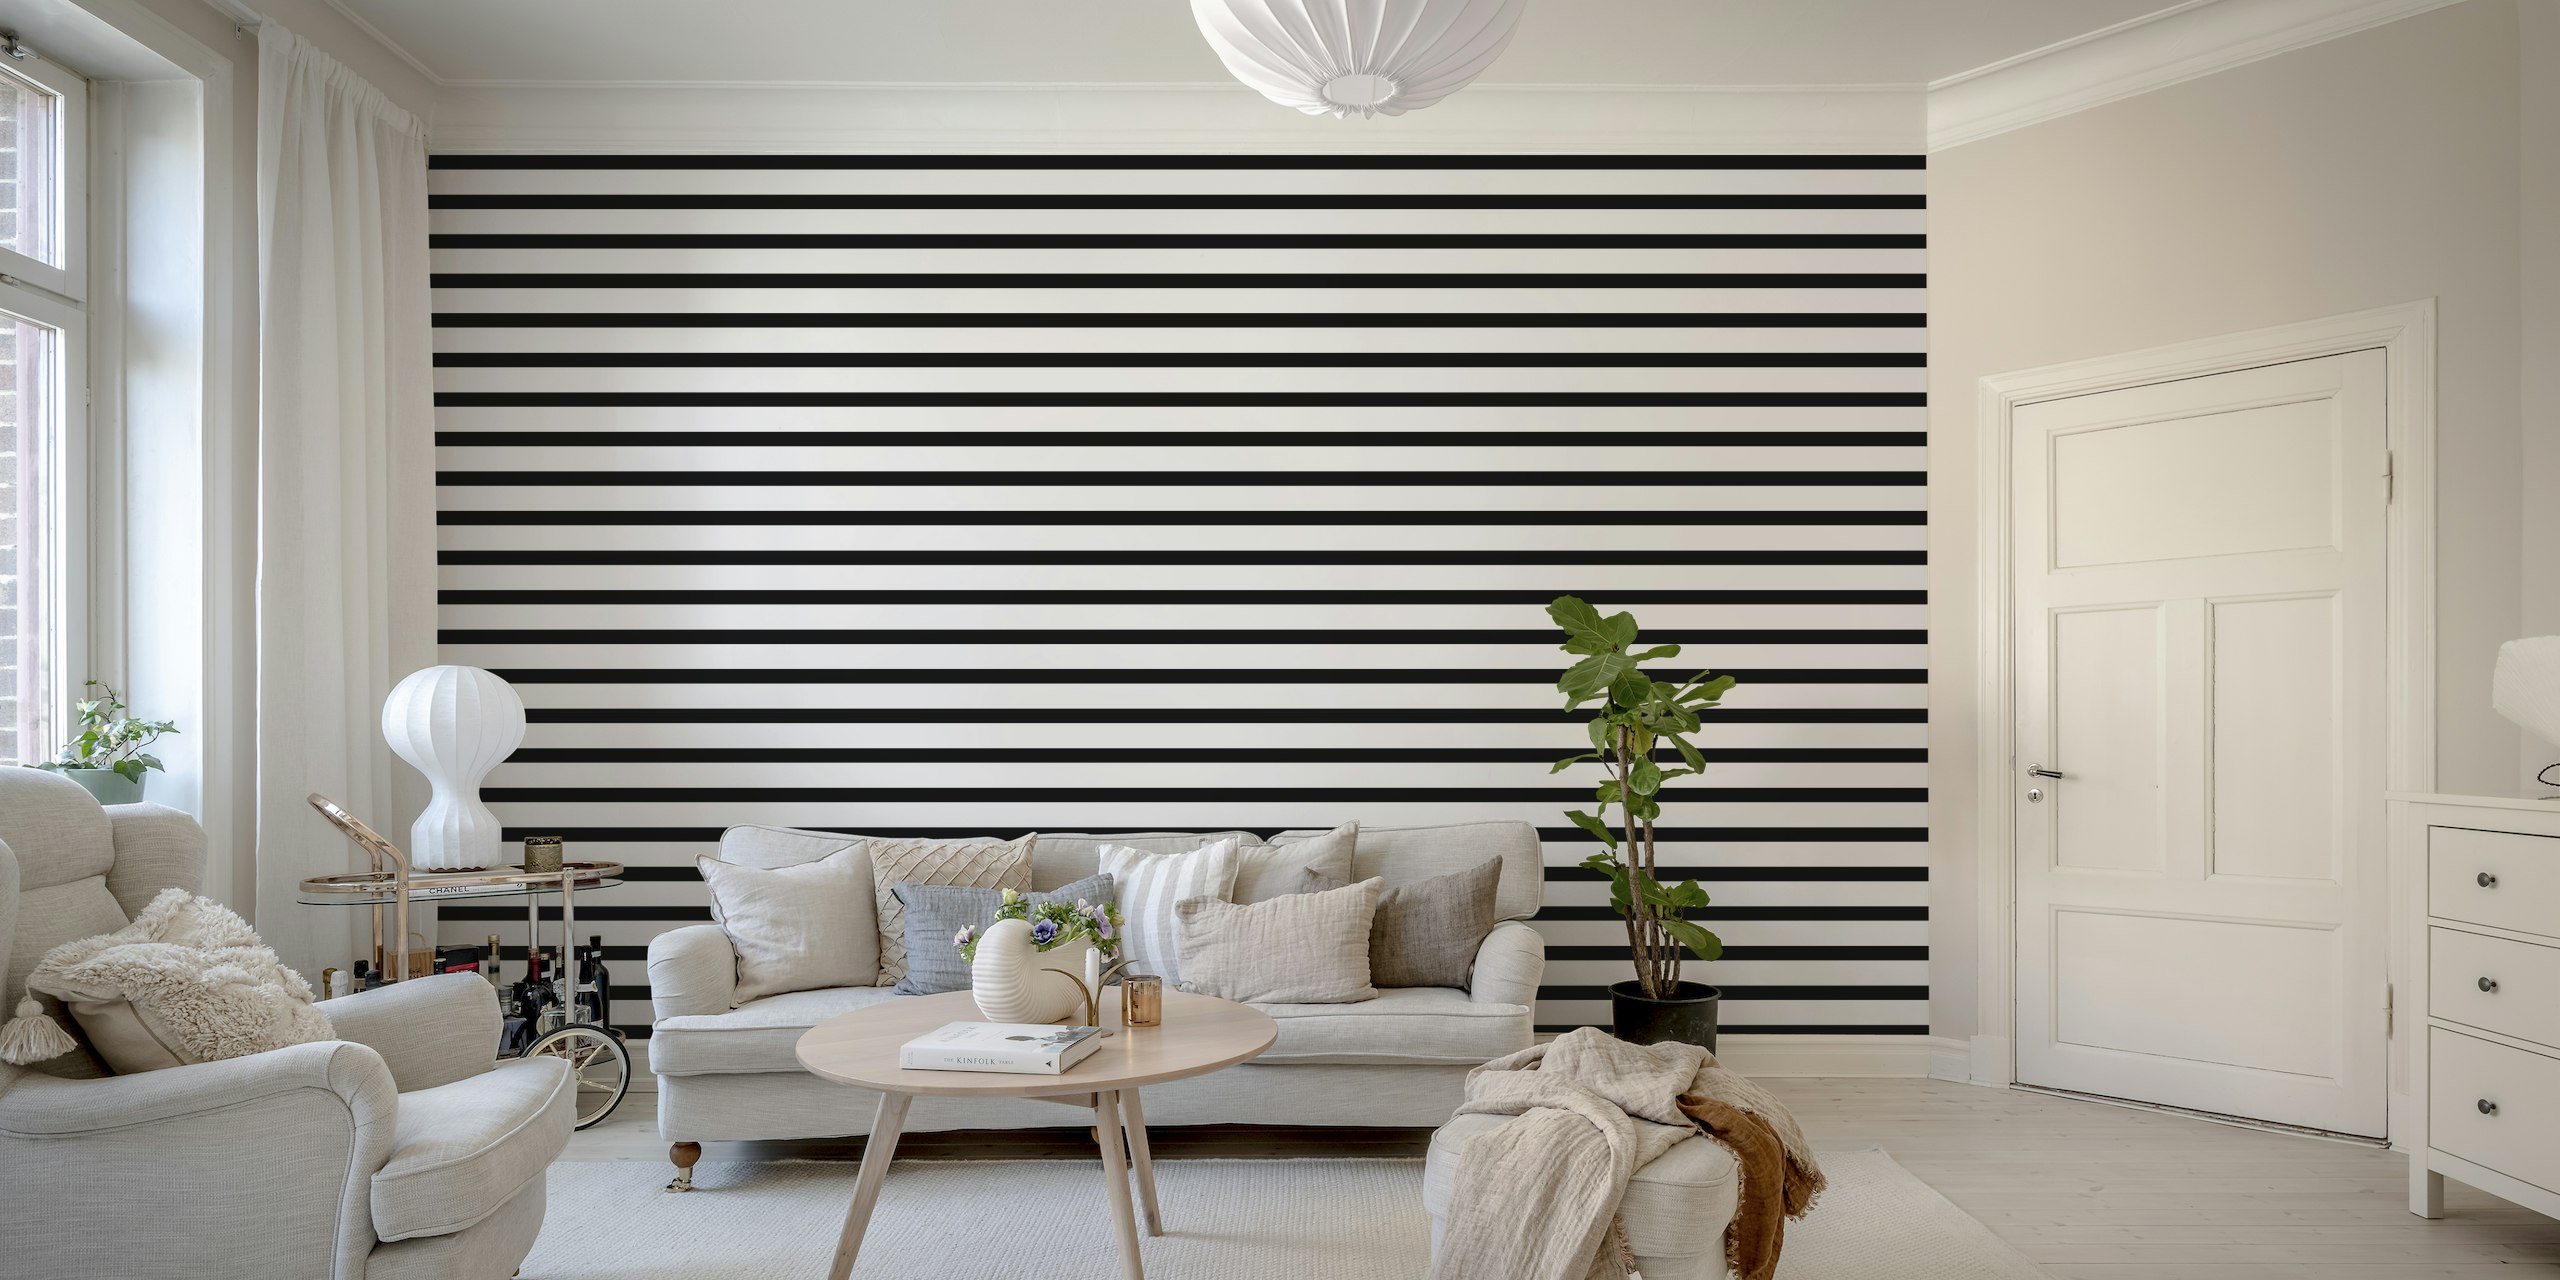 Black and white striped wall mural for a modern and bold interior